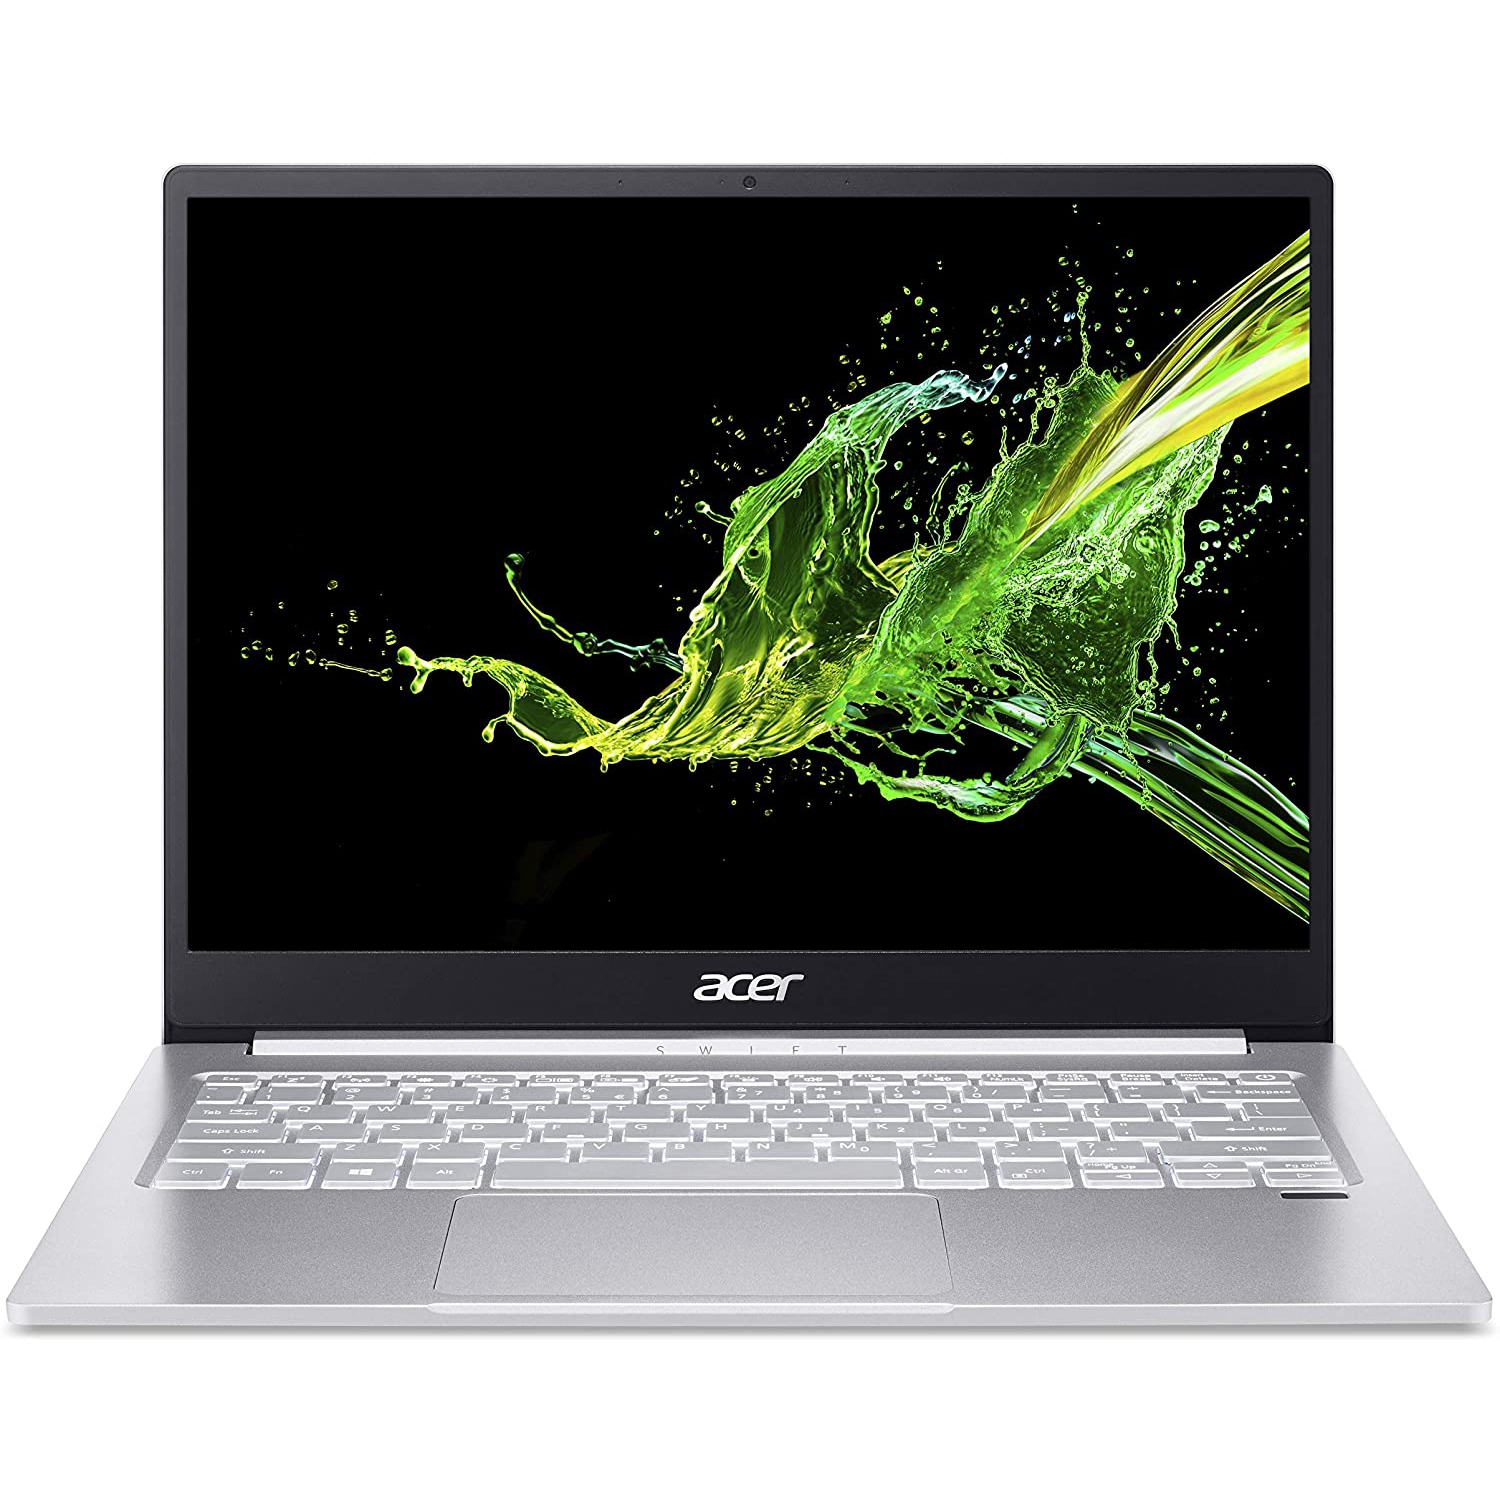 Refurbished (Excellent) - Acer 13.5" Swift 3 Laptop (Intel Core i7-1165G7/16Gb/1.0Tb SSD/Win10) - Manufacturer ReCertified w/ 1 Year Warranty